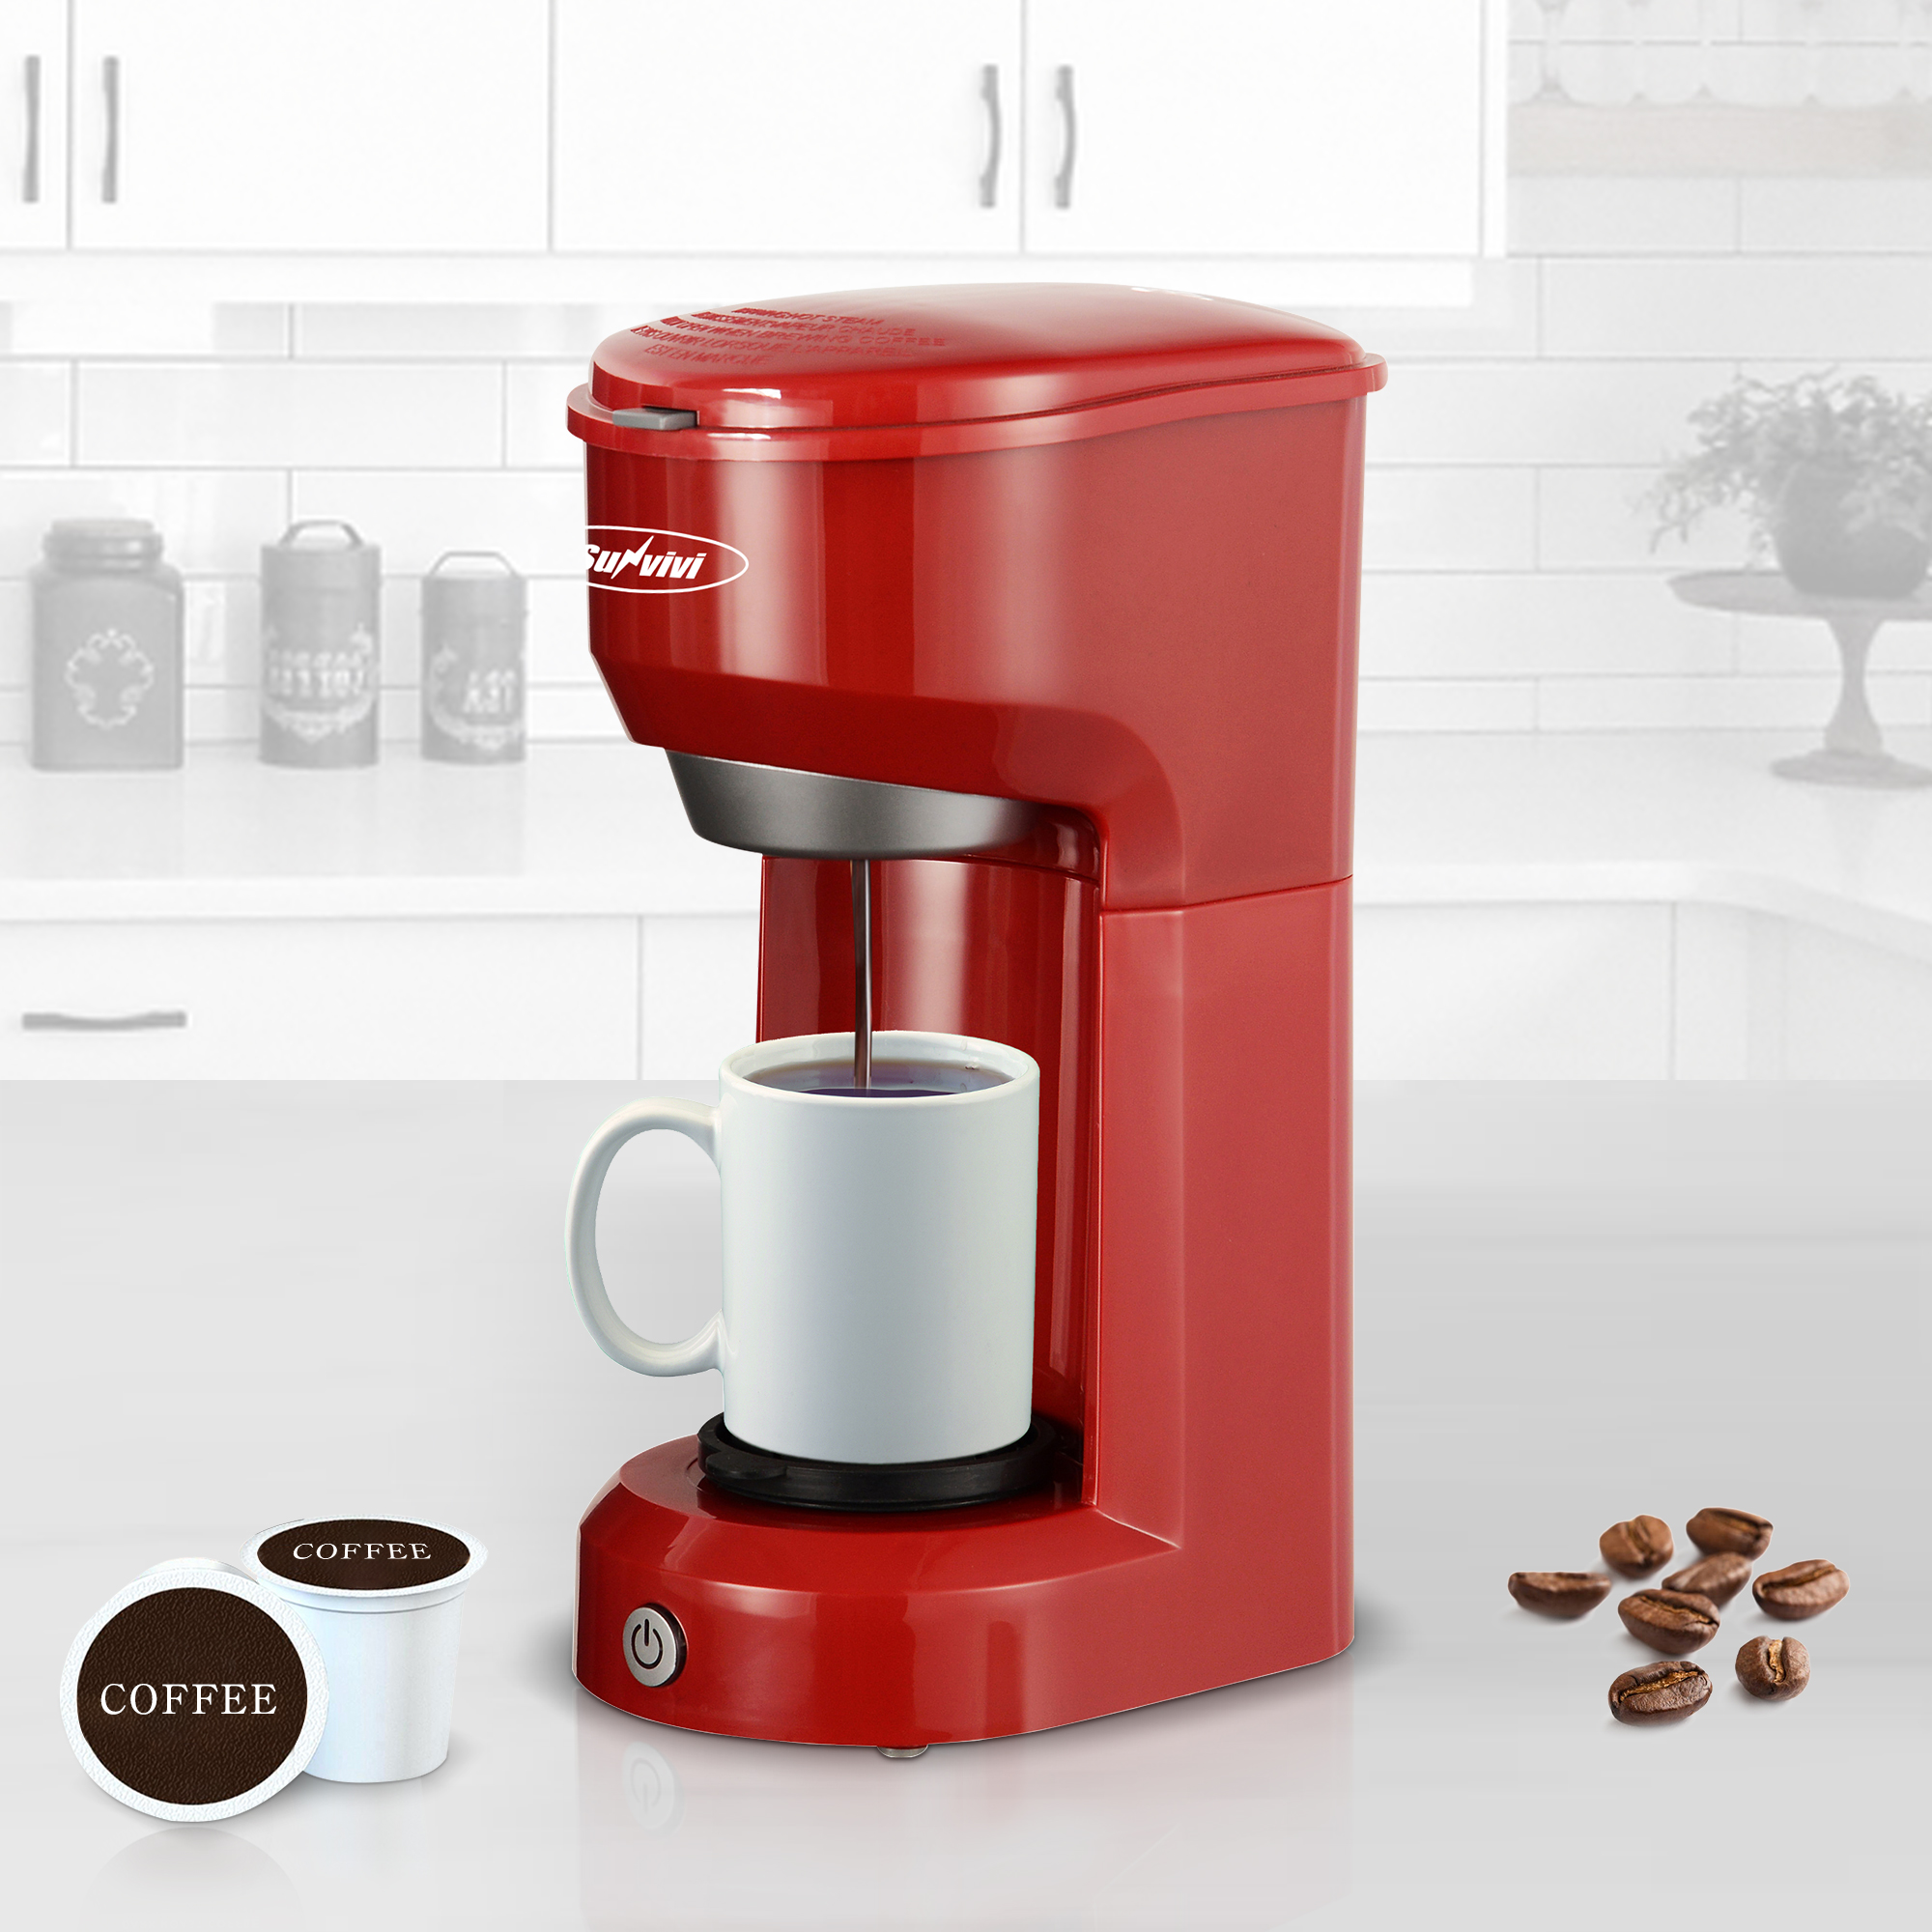 Single Serve Coffee Maker Brewer for Single Cup, K-Cup Coffeemaker with Permanent Filter, 6oz to 14oz Mug, One-Touch Control Button with Illumination, Red - image 2 of 9